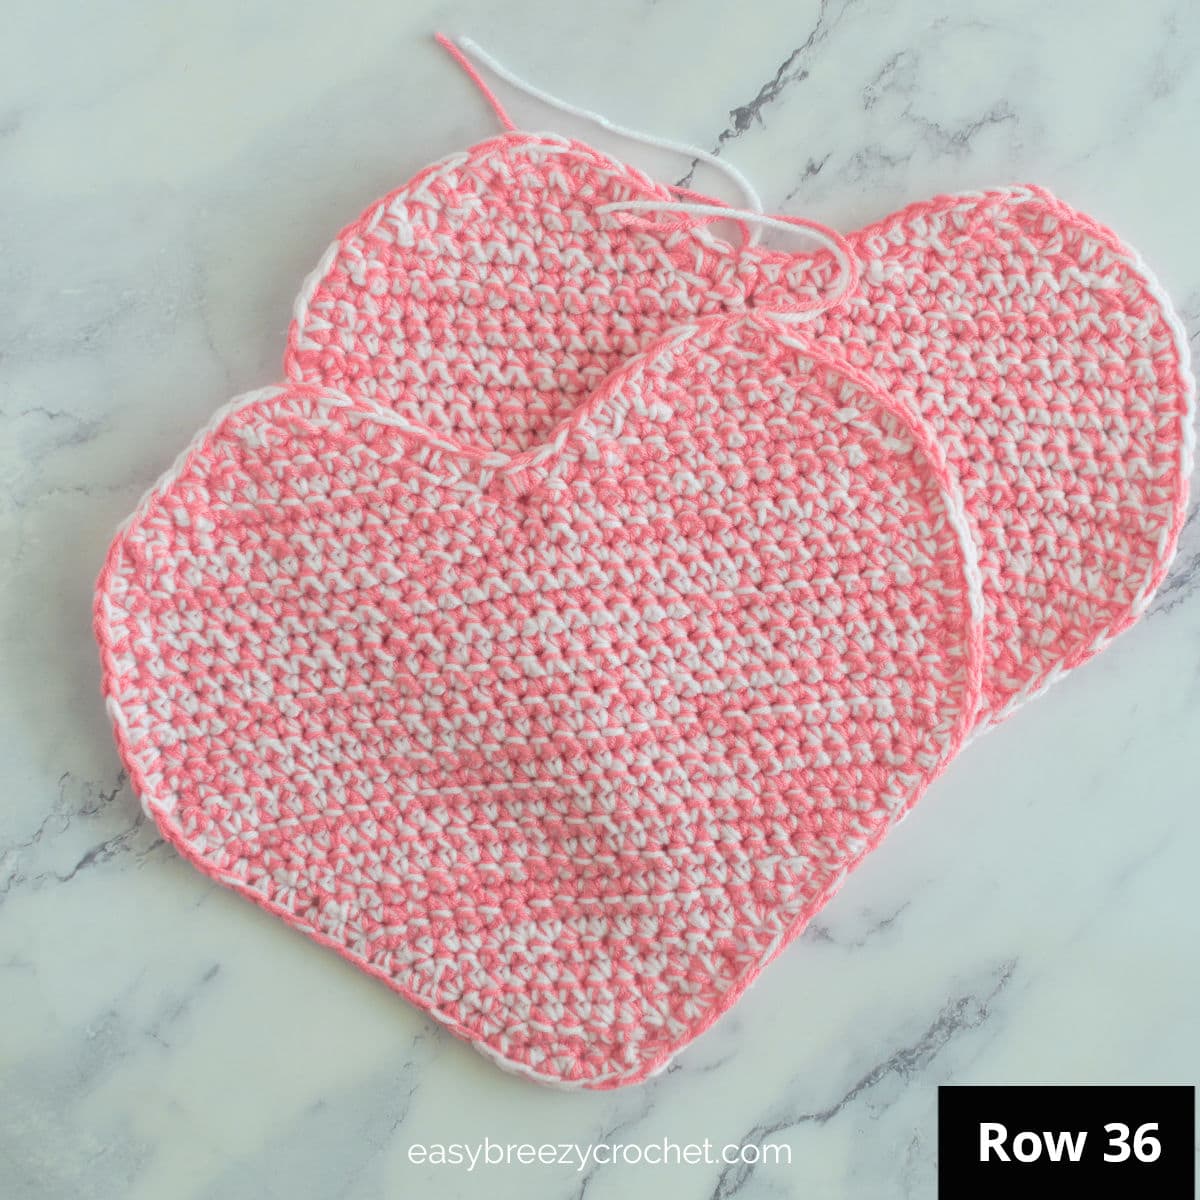 Two complete halves of a crochet heart cushion.
